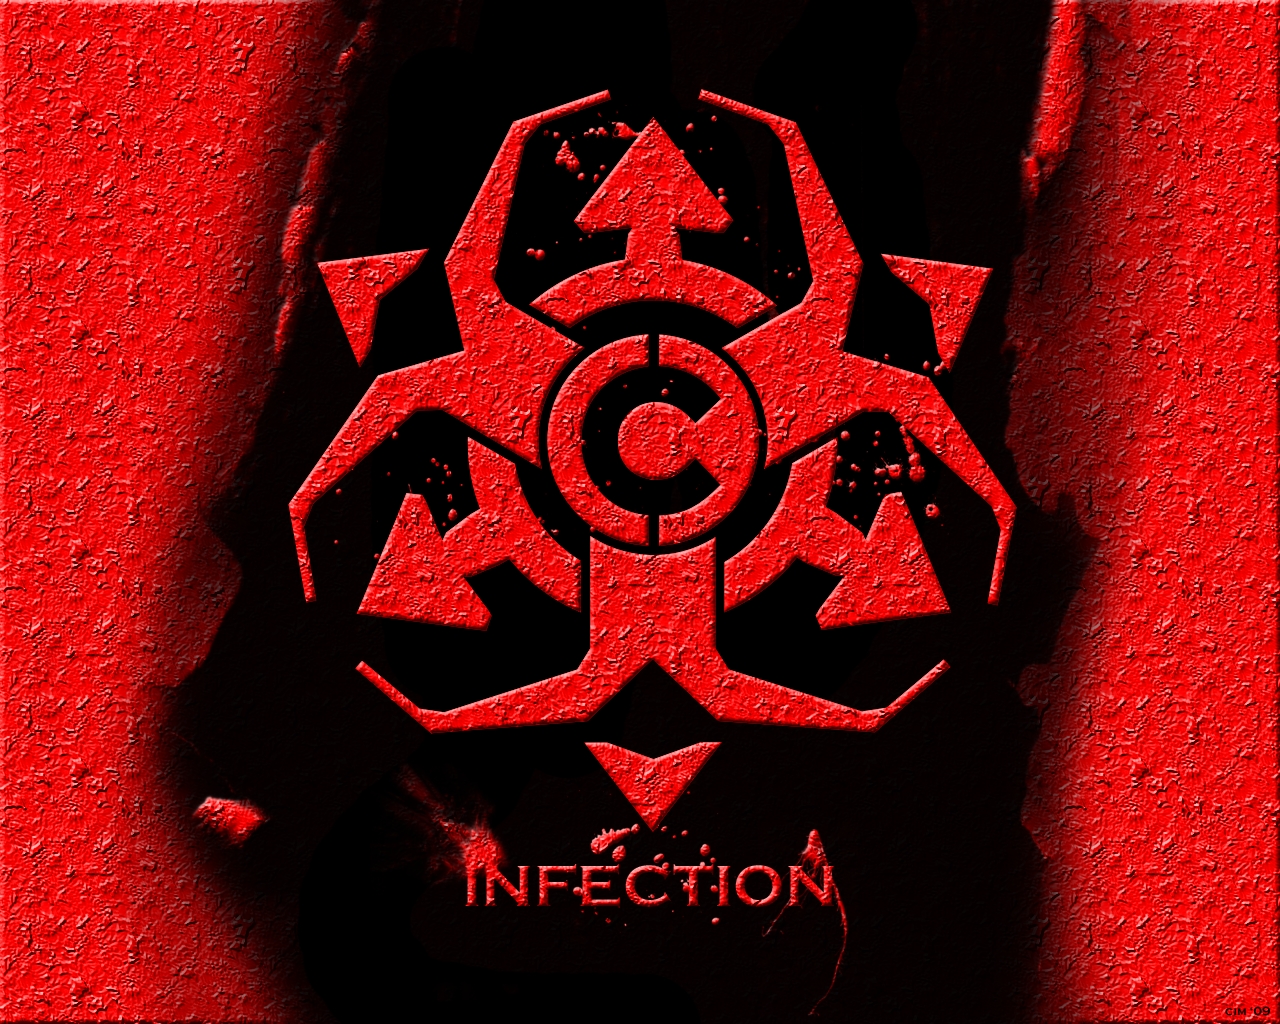 Chimaira Infection Wallpaper Galleryhip The